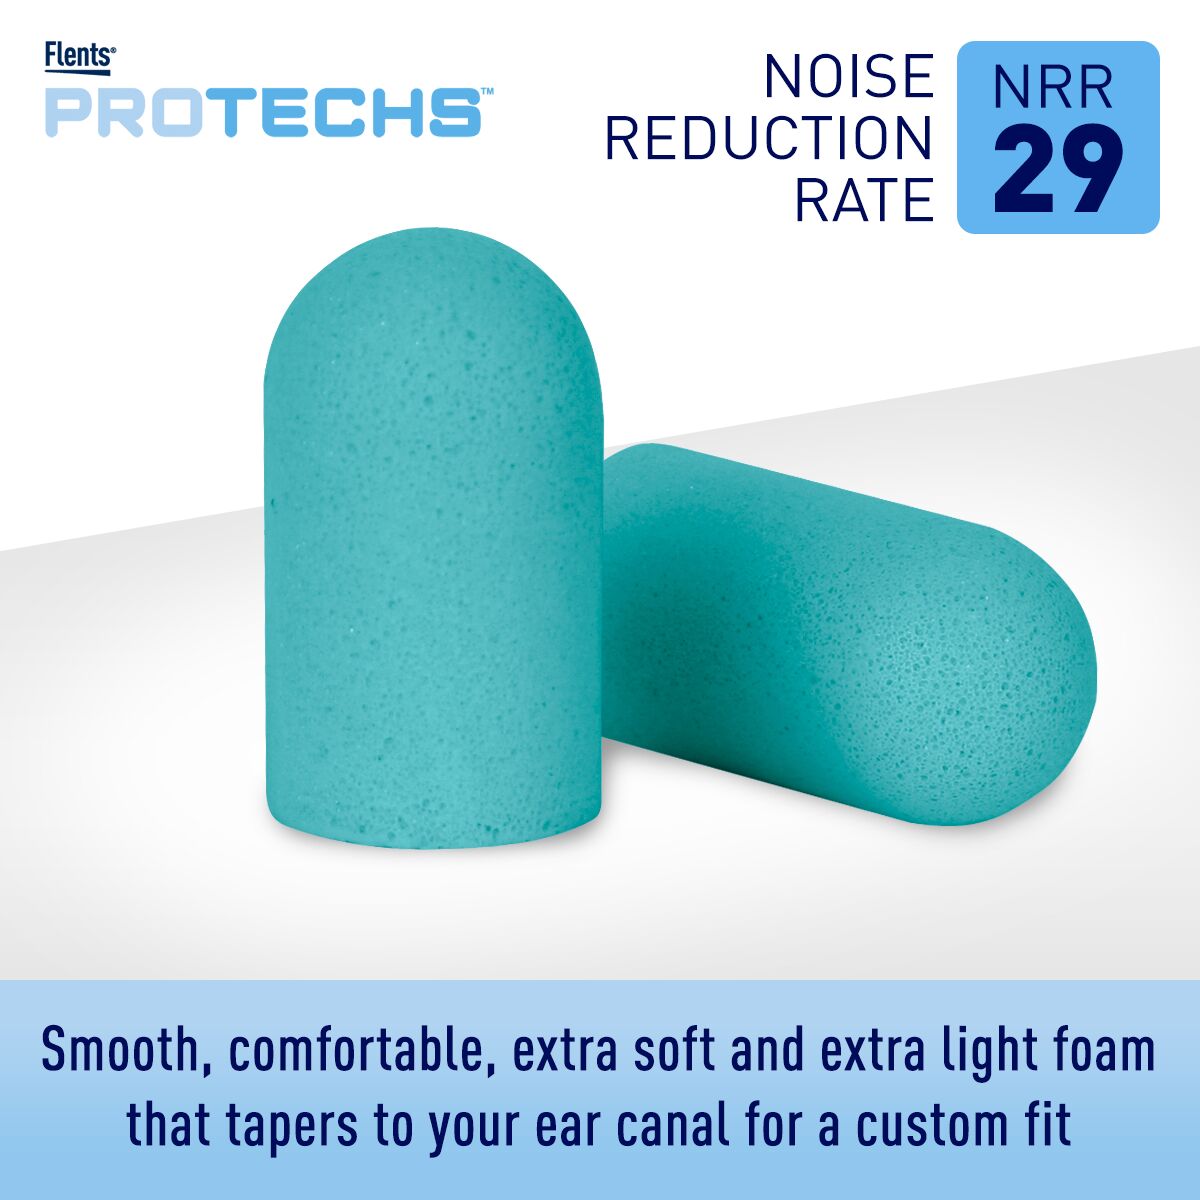 Noise reduction rate 29